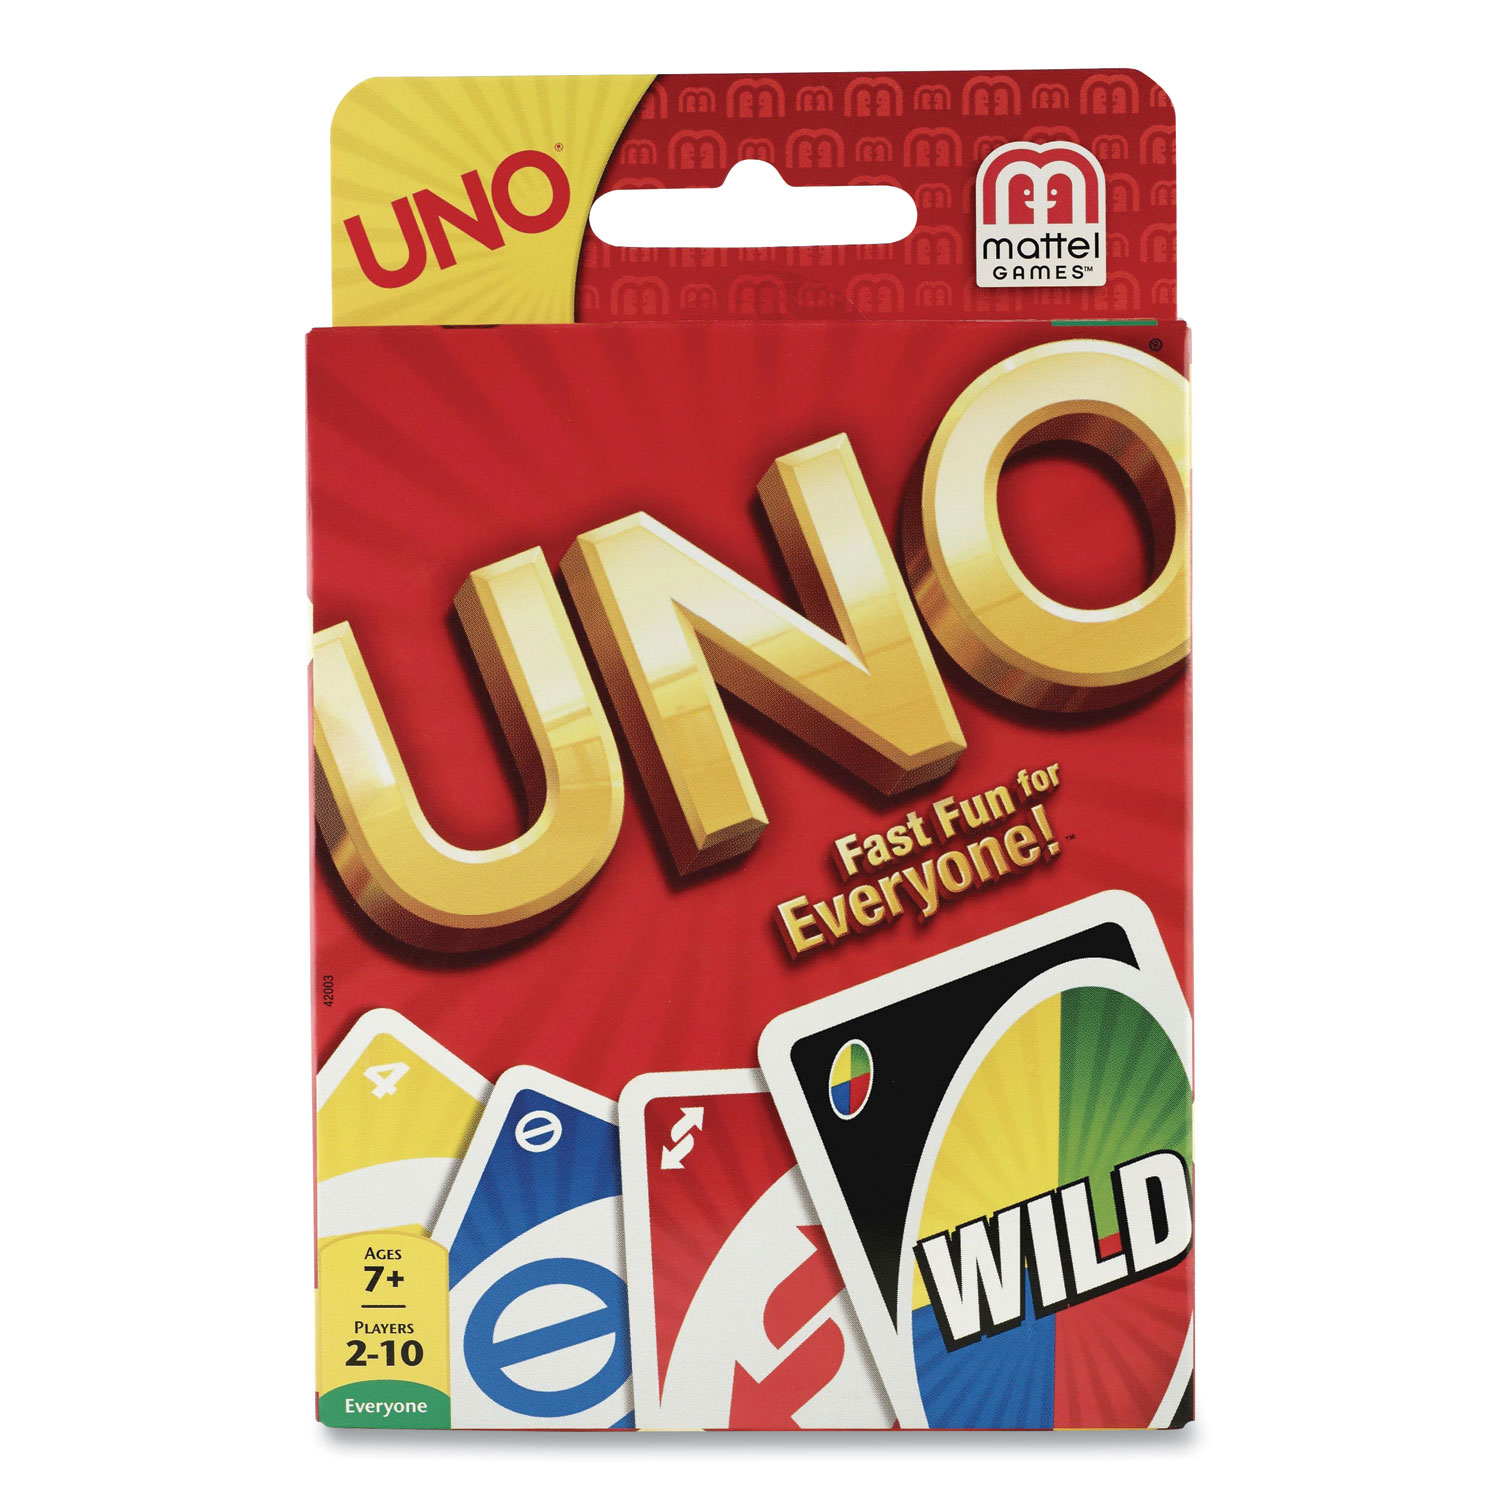 UNO! Mobile Fun Pack is Live!, party, skill